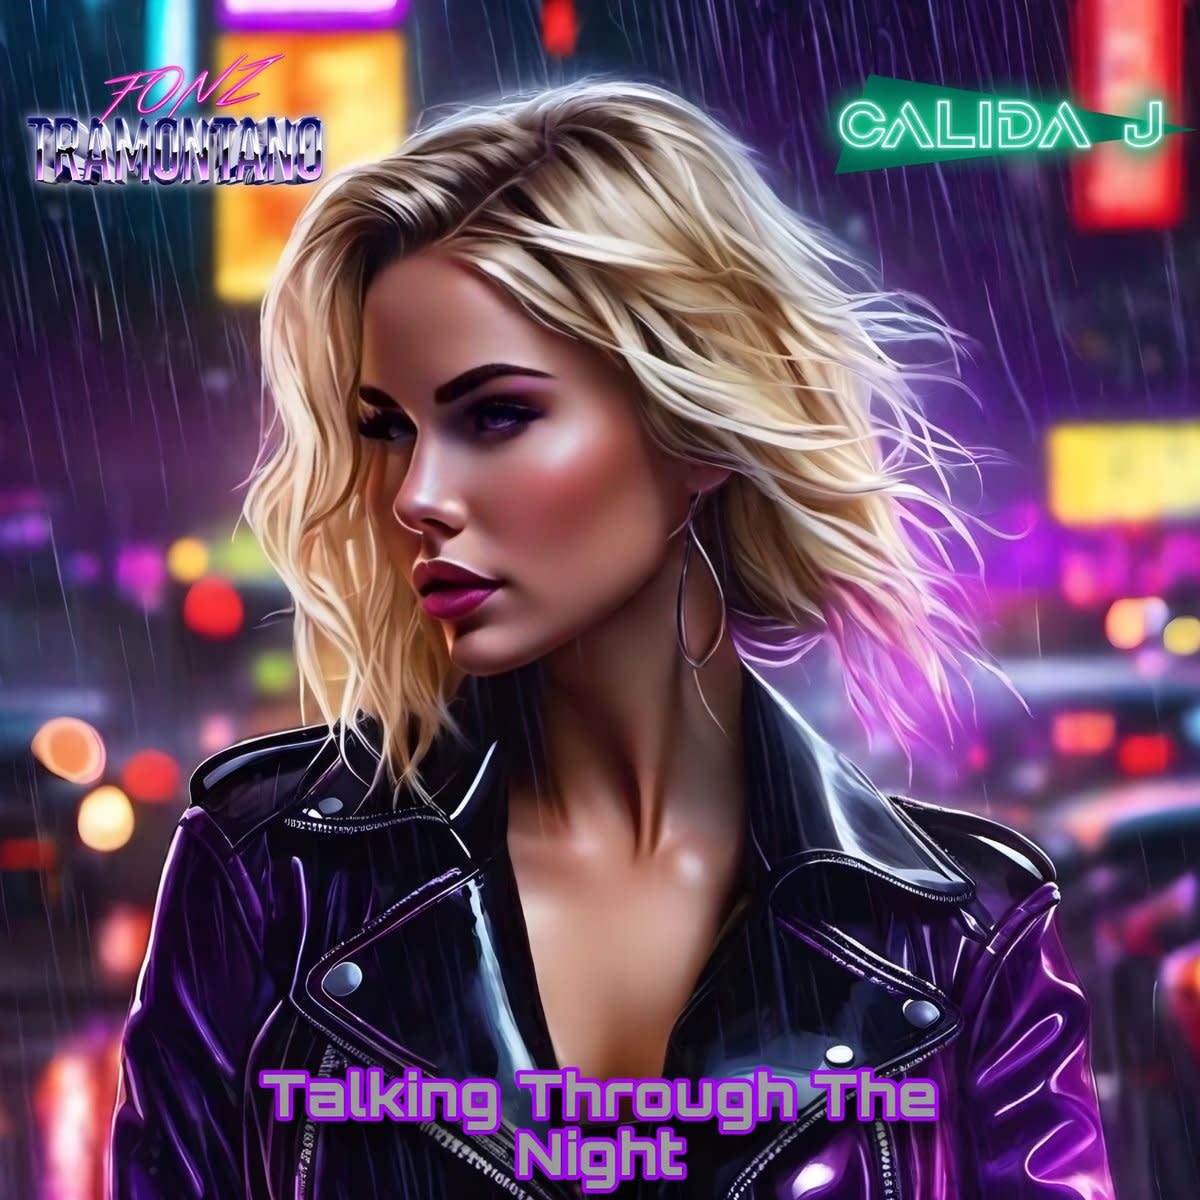 Synth Single Review: “Talking Through The Night” by Fonz Tramontano & Calida J